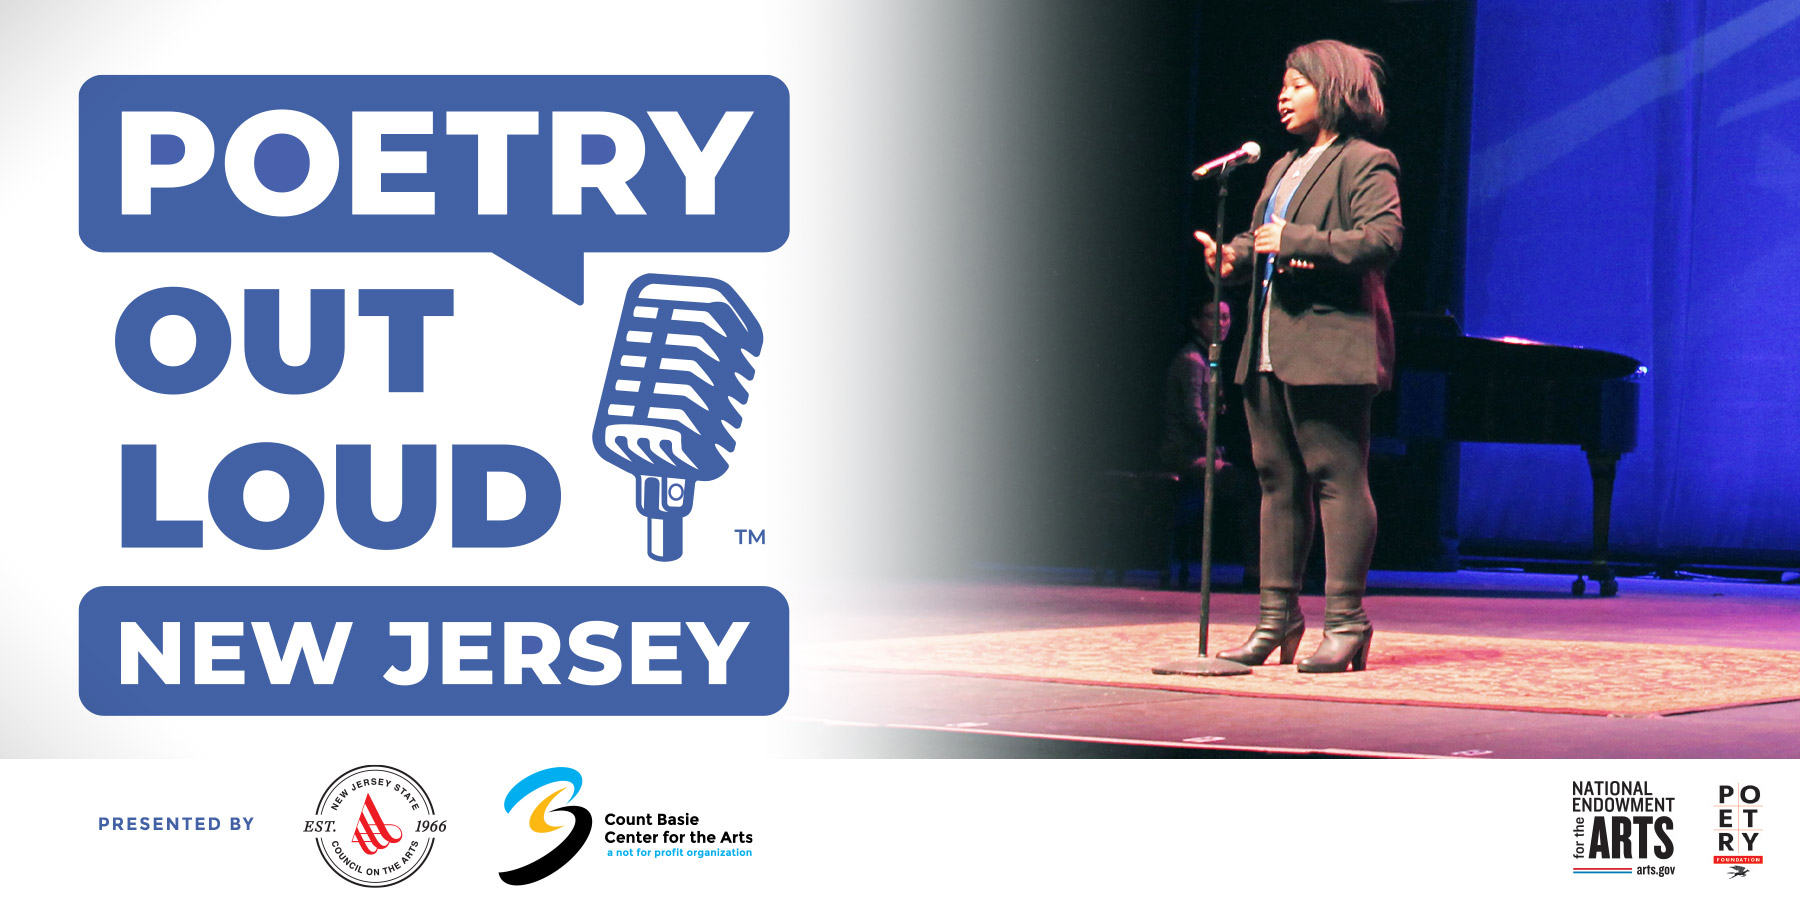 Poetry Out Loud New jersey. Presented by the New Jersey State Council on the Arts and the Count Basie Center for the Arts. A program of the National Endowment for the Arts and the Poetry Foundation.